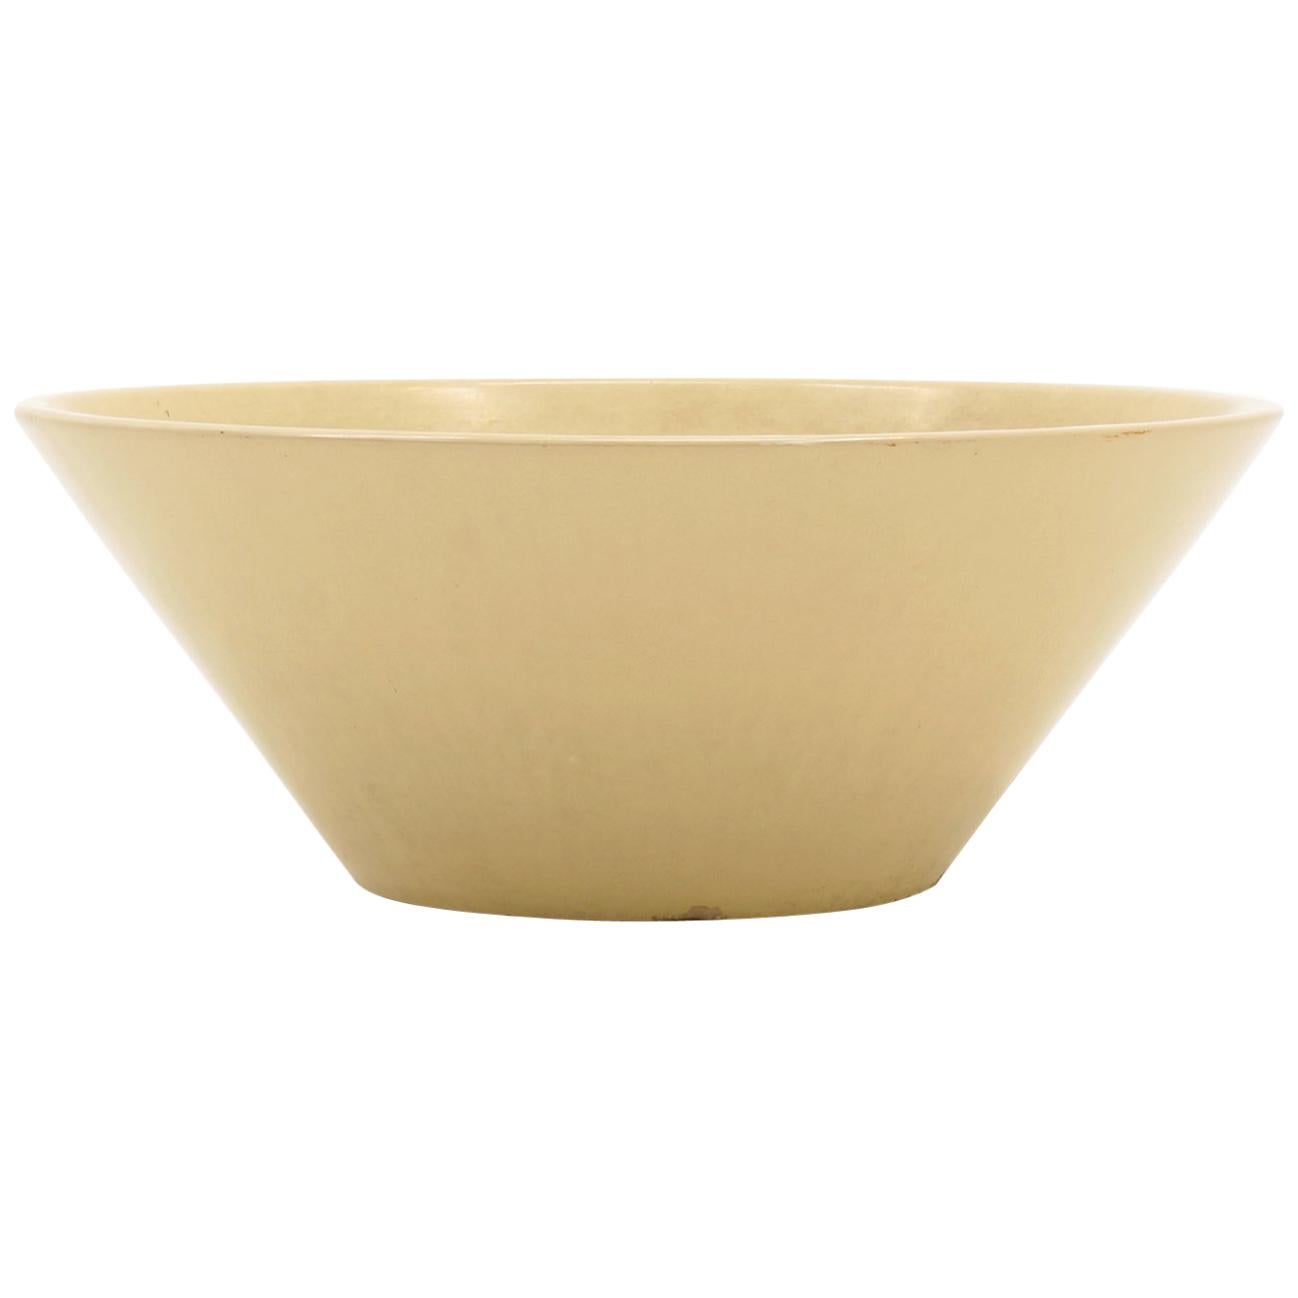 Wok Planter by Legardo Tackett for Architectural Pottery, Ready to Use